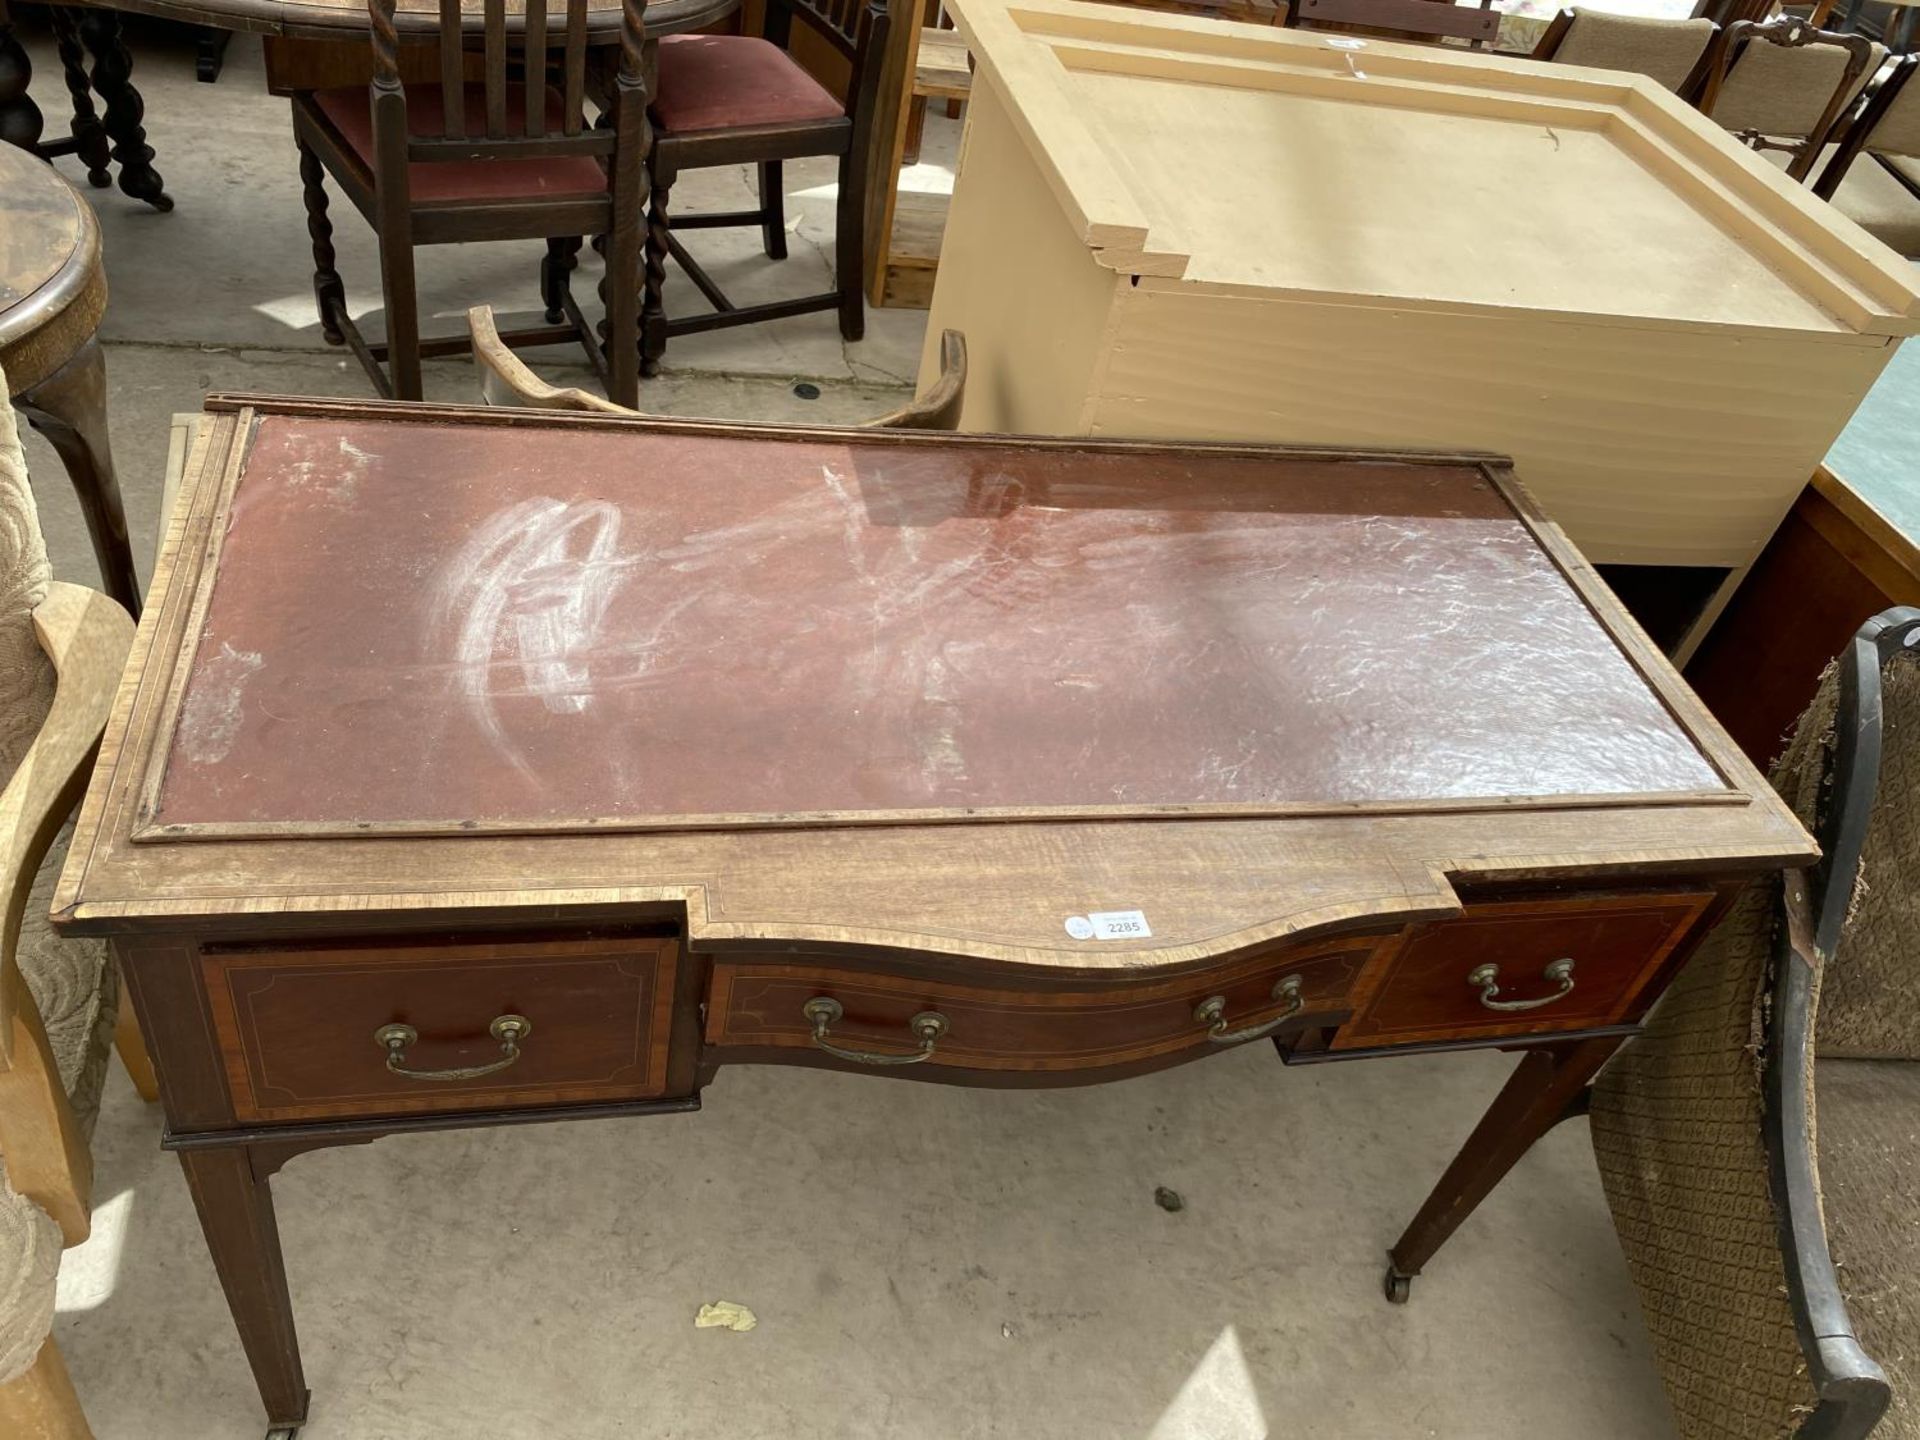 AN EDWARDIAN AND MAHOGANY INLAY DESK ON TAPERED LEGS AND SPADE FEET - Image 2 of 5